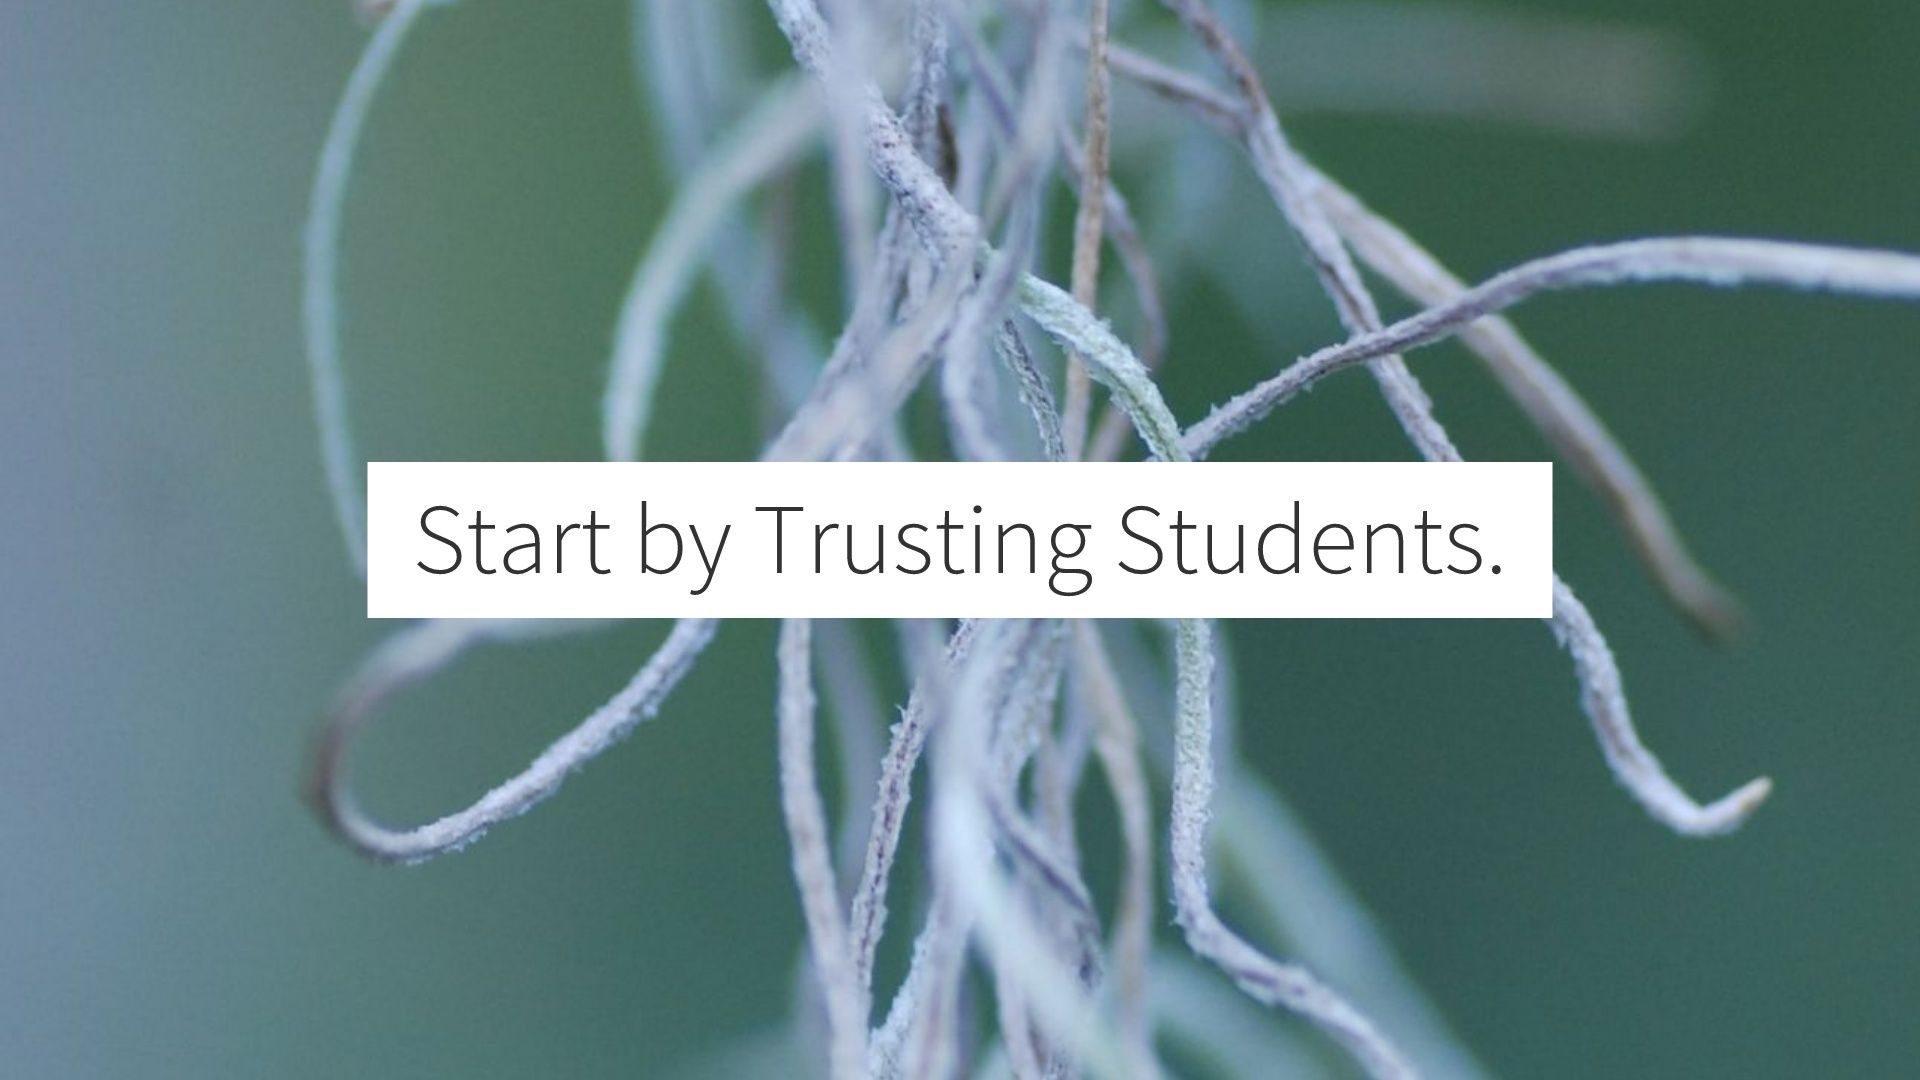 The words "start by trusting students" on top of an image of withering stems from a small plant.